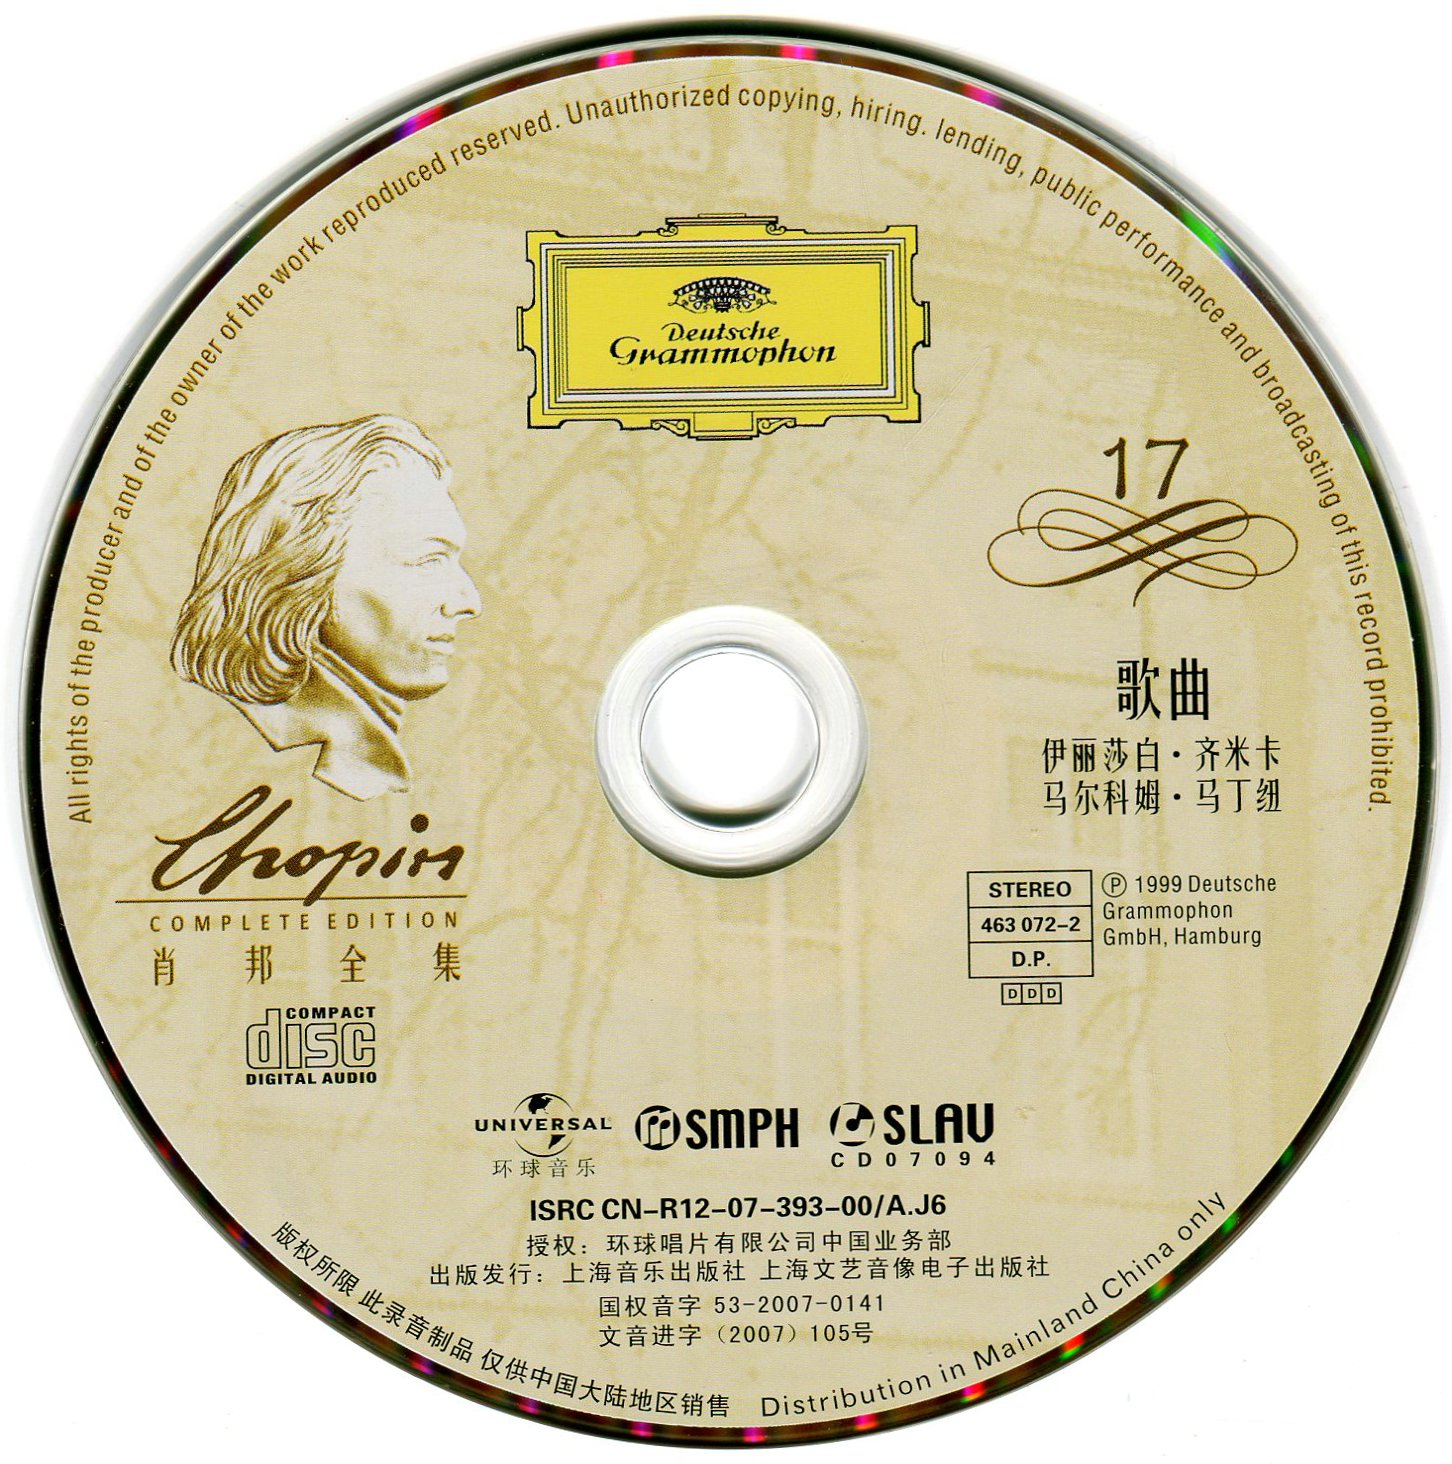 chopin complete edition torrent flac kenny